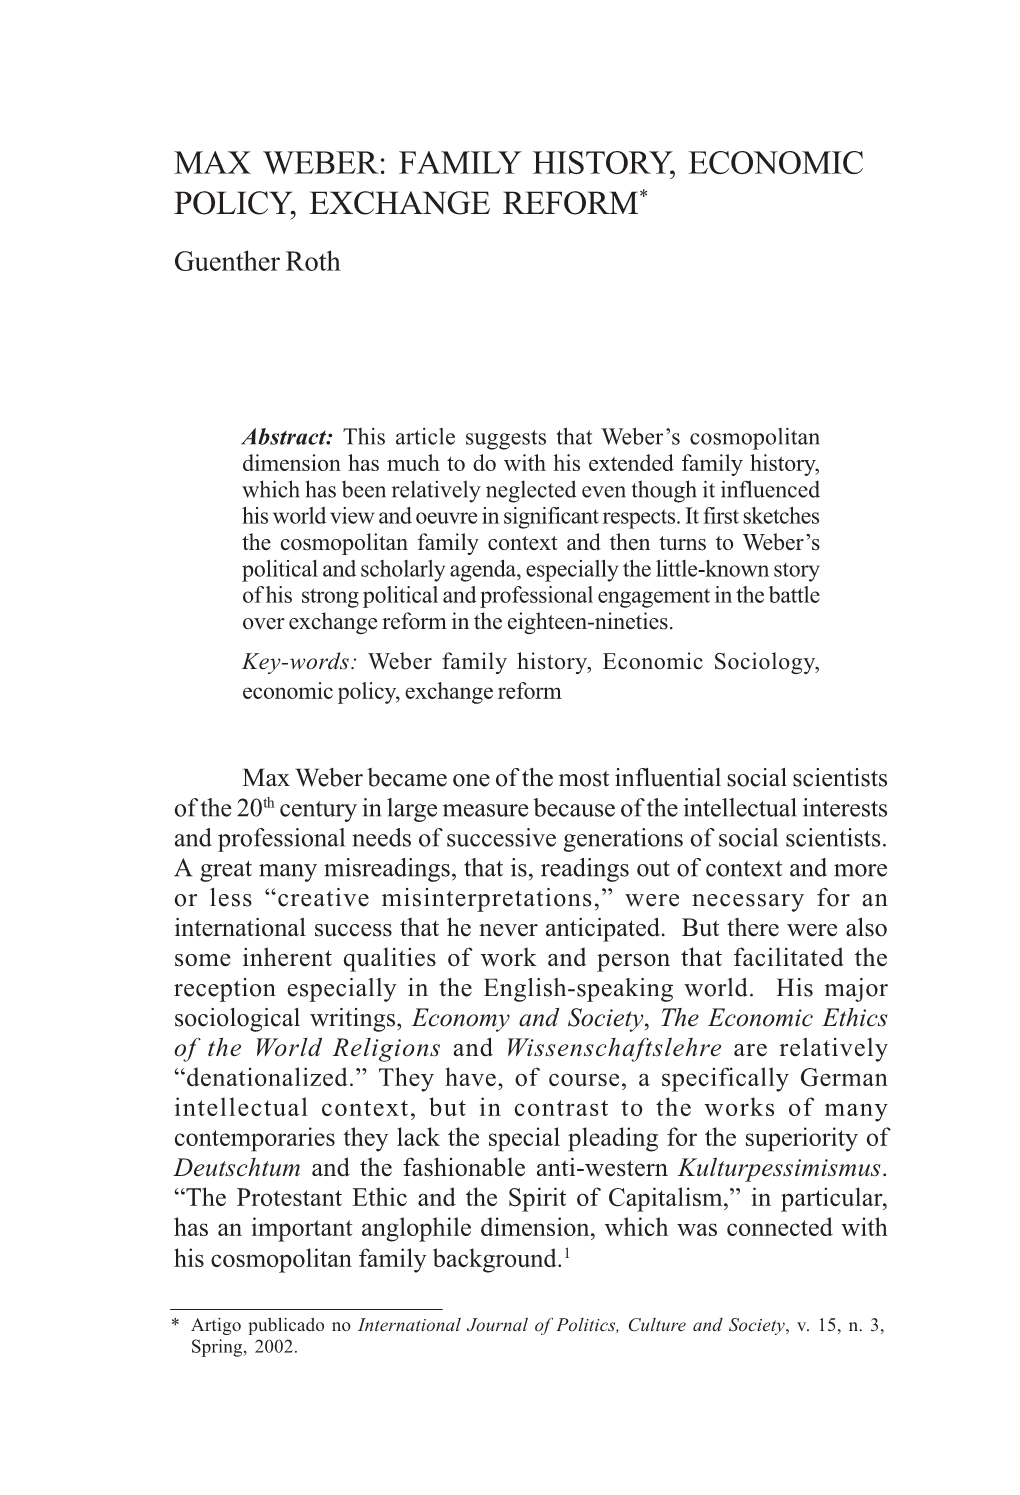 MAX WEBER: FAMILY HISTORY, ECONOMIC POLICY, EXCHANGE REFORM* Guenther Roth